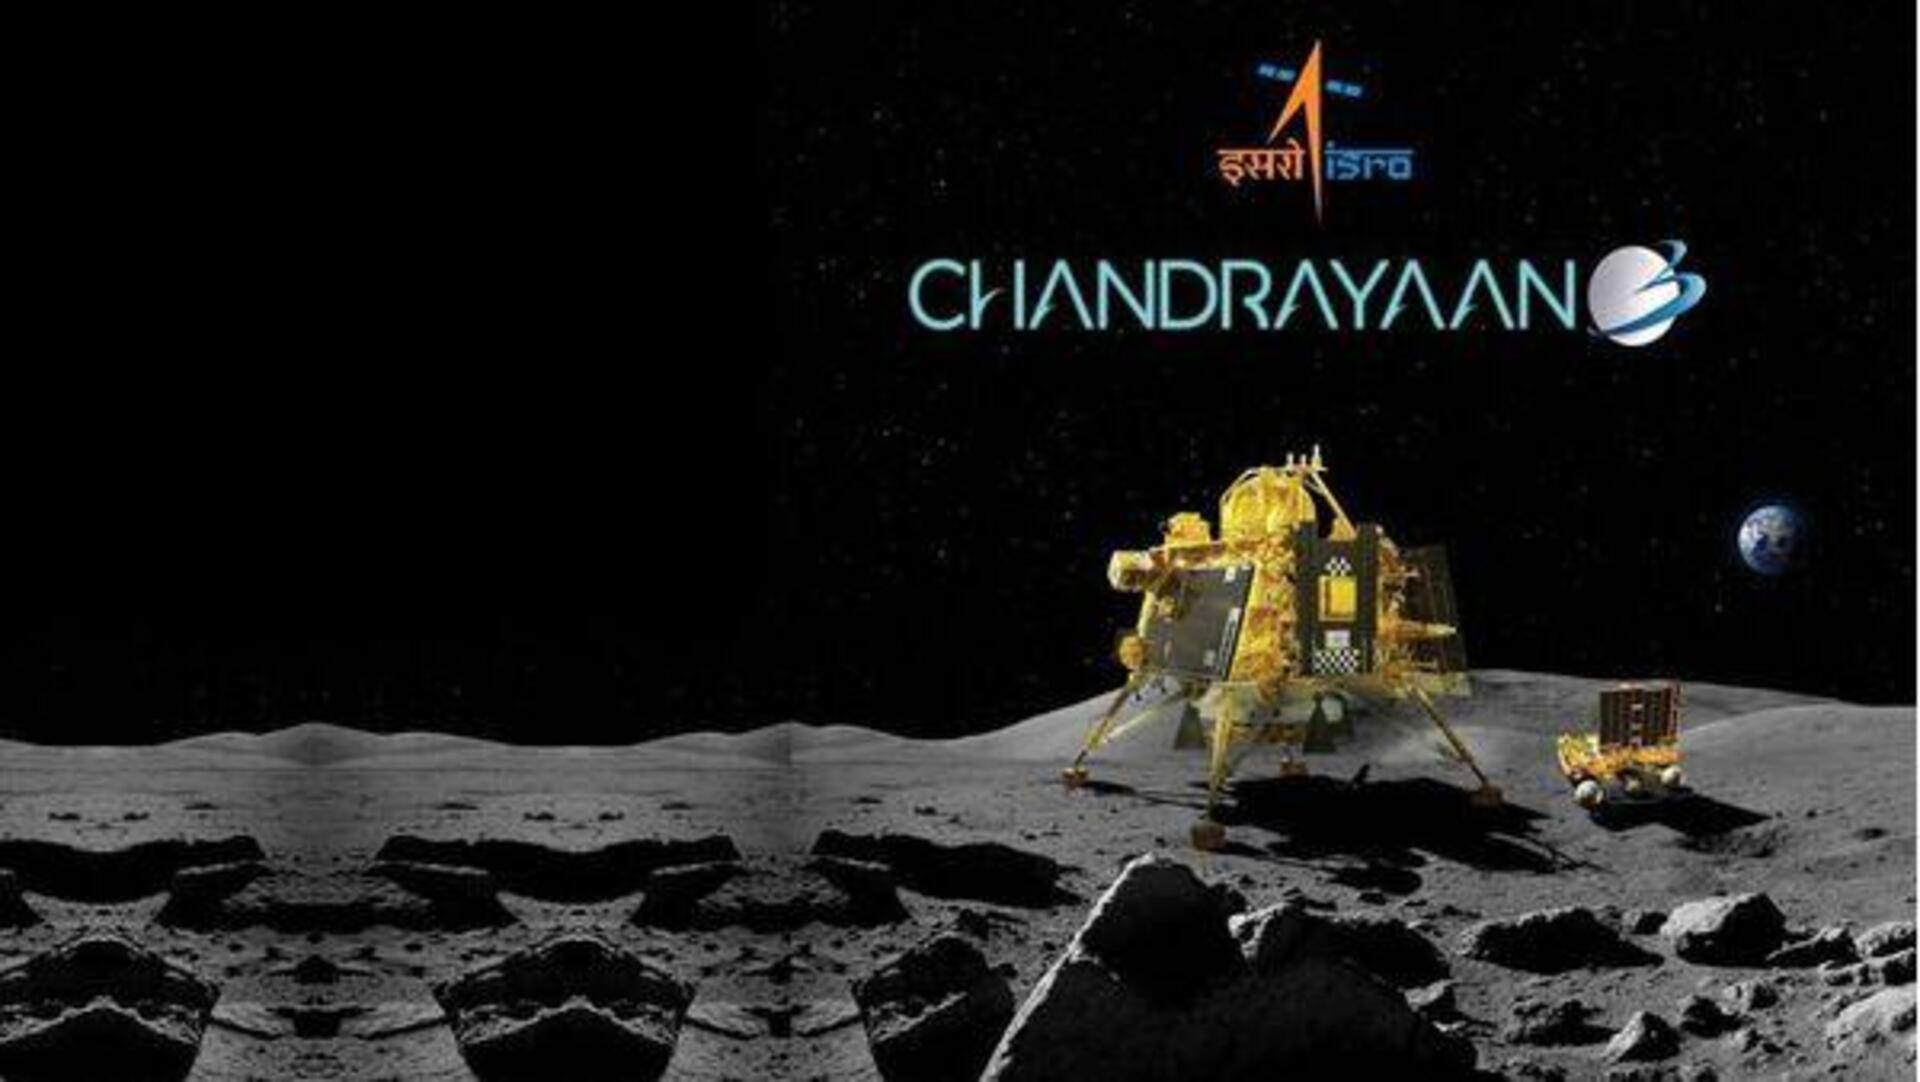 Chandrayaan-3 landing site to be called Shiv-Shakti Point